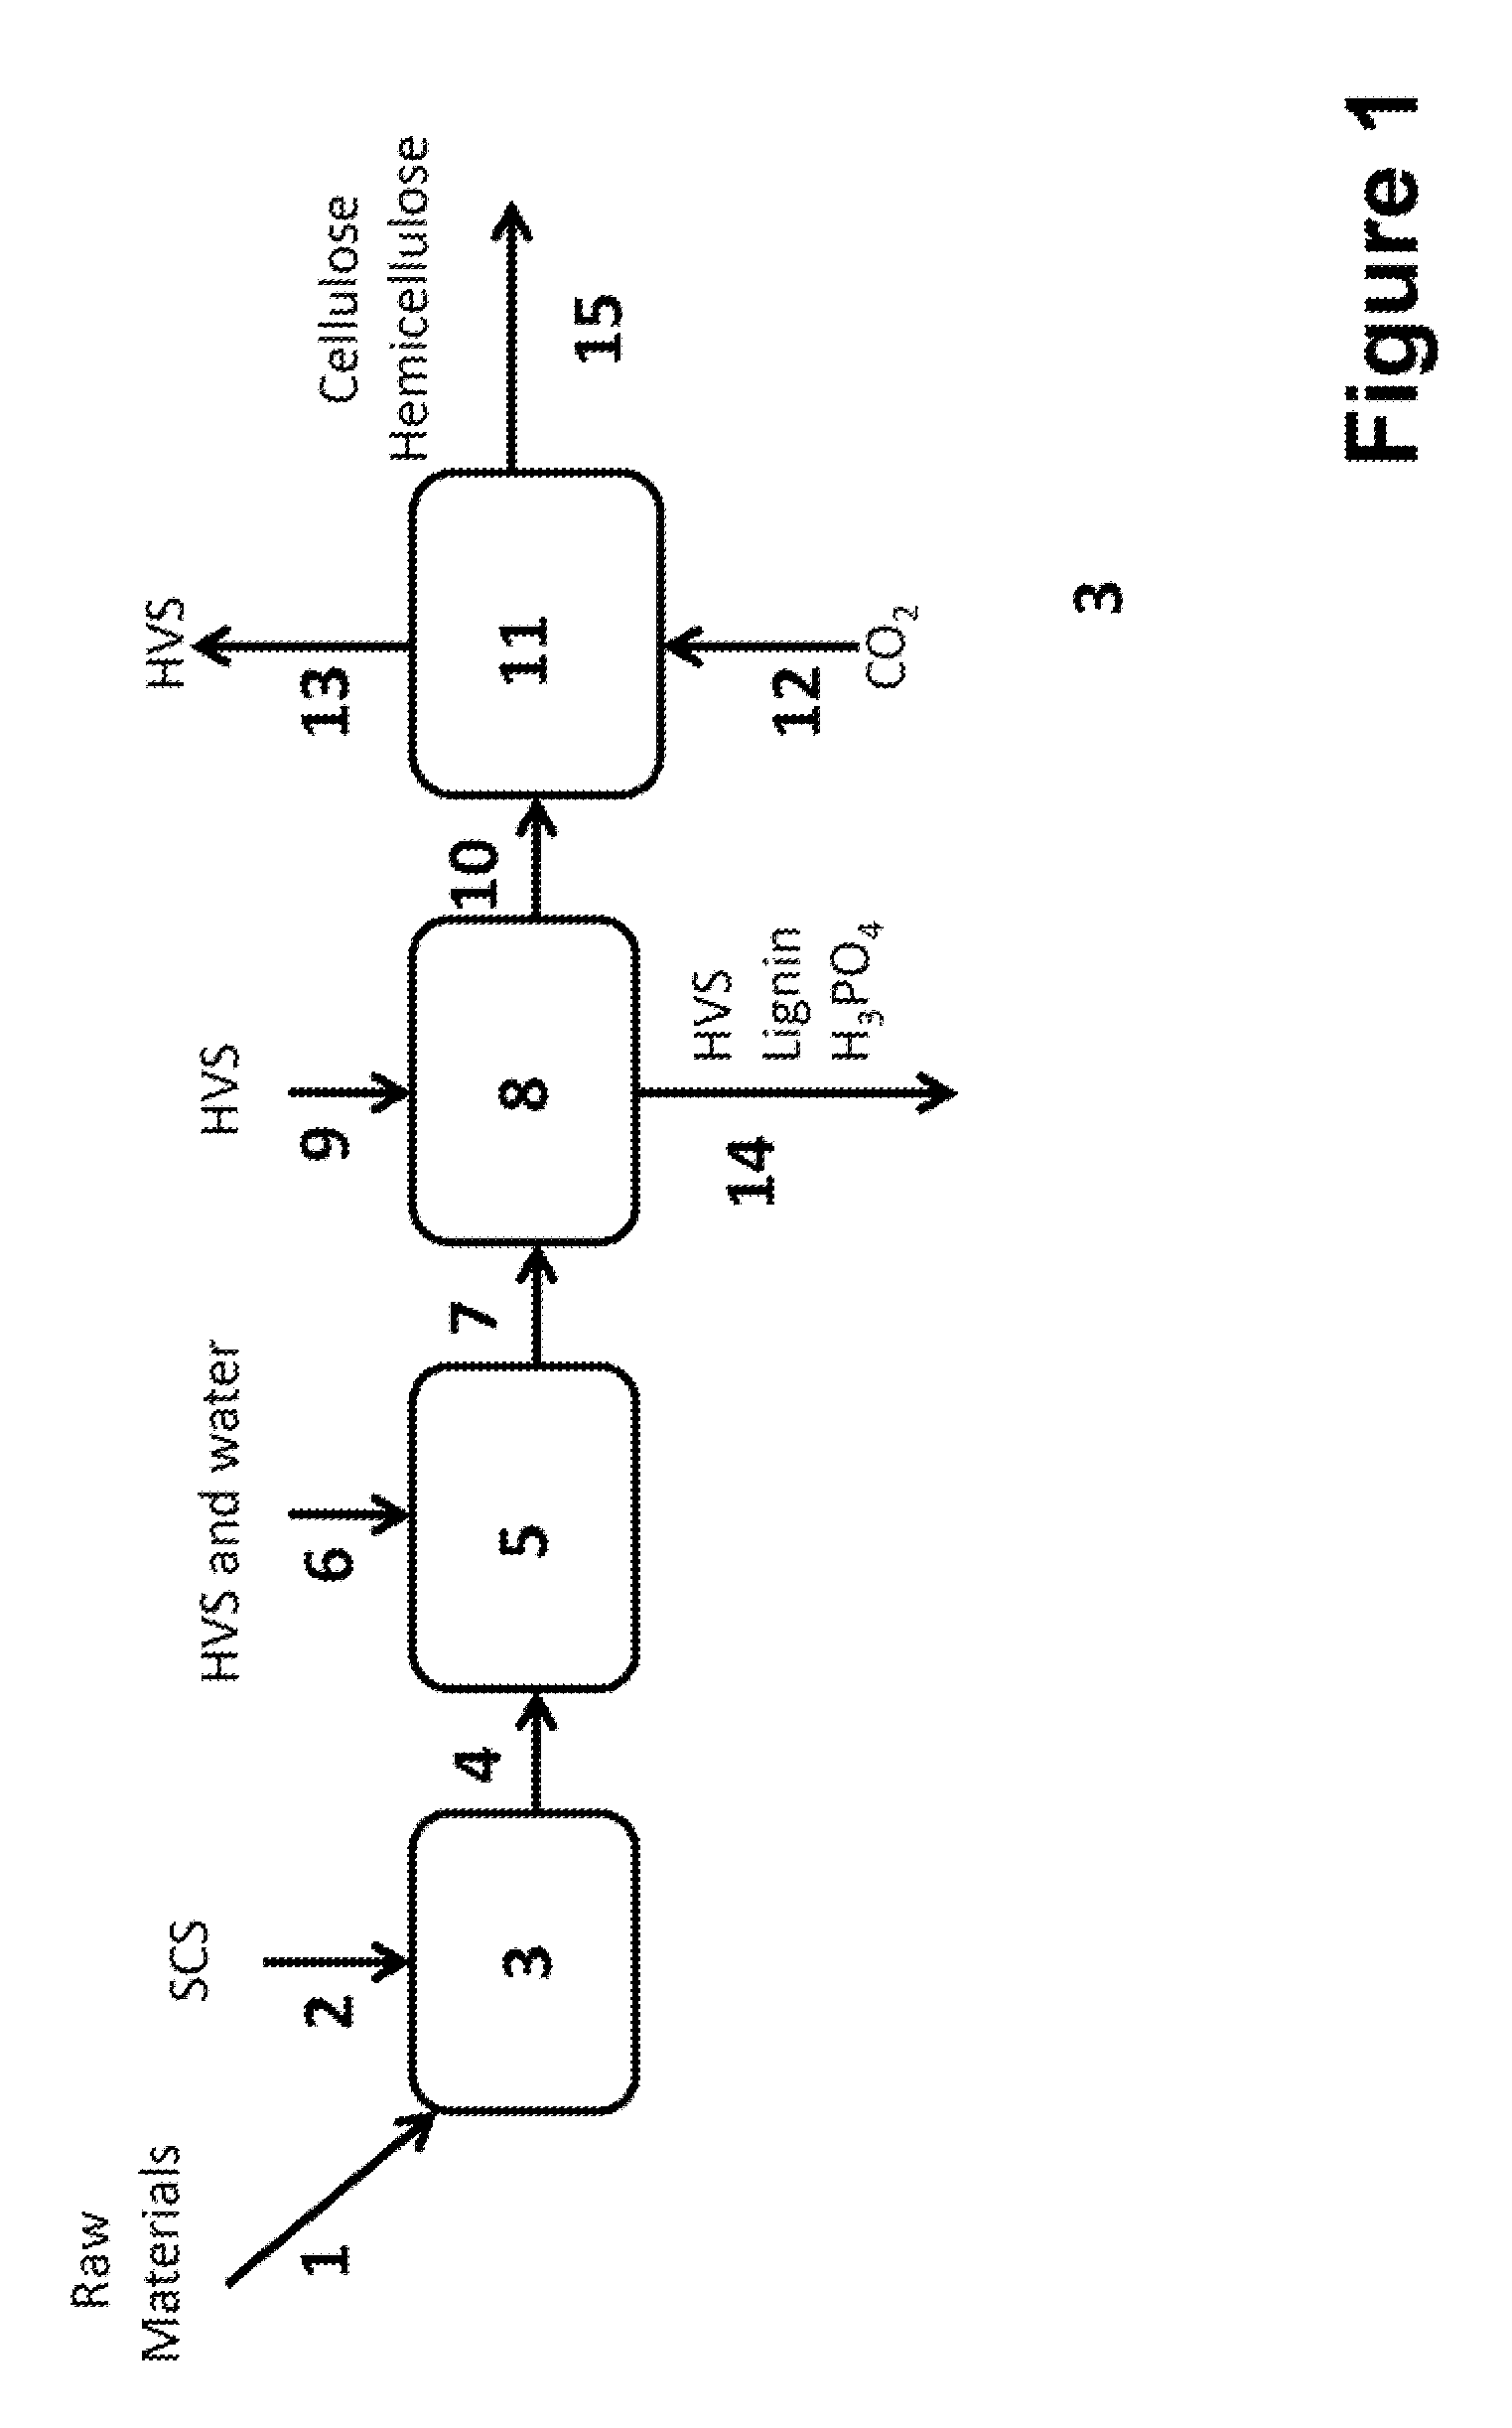 Method and apparatus for lignocellulose pretreatment using a super-cellulose-solvent and highly volatile solvents